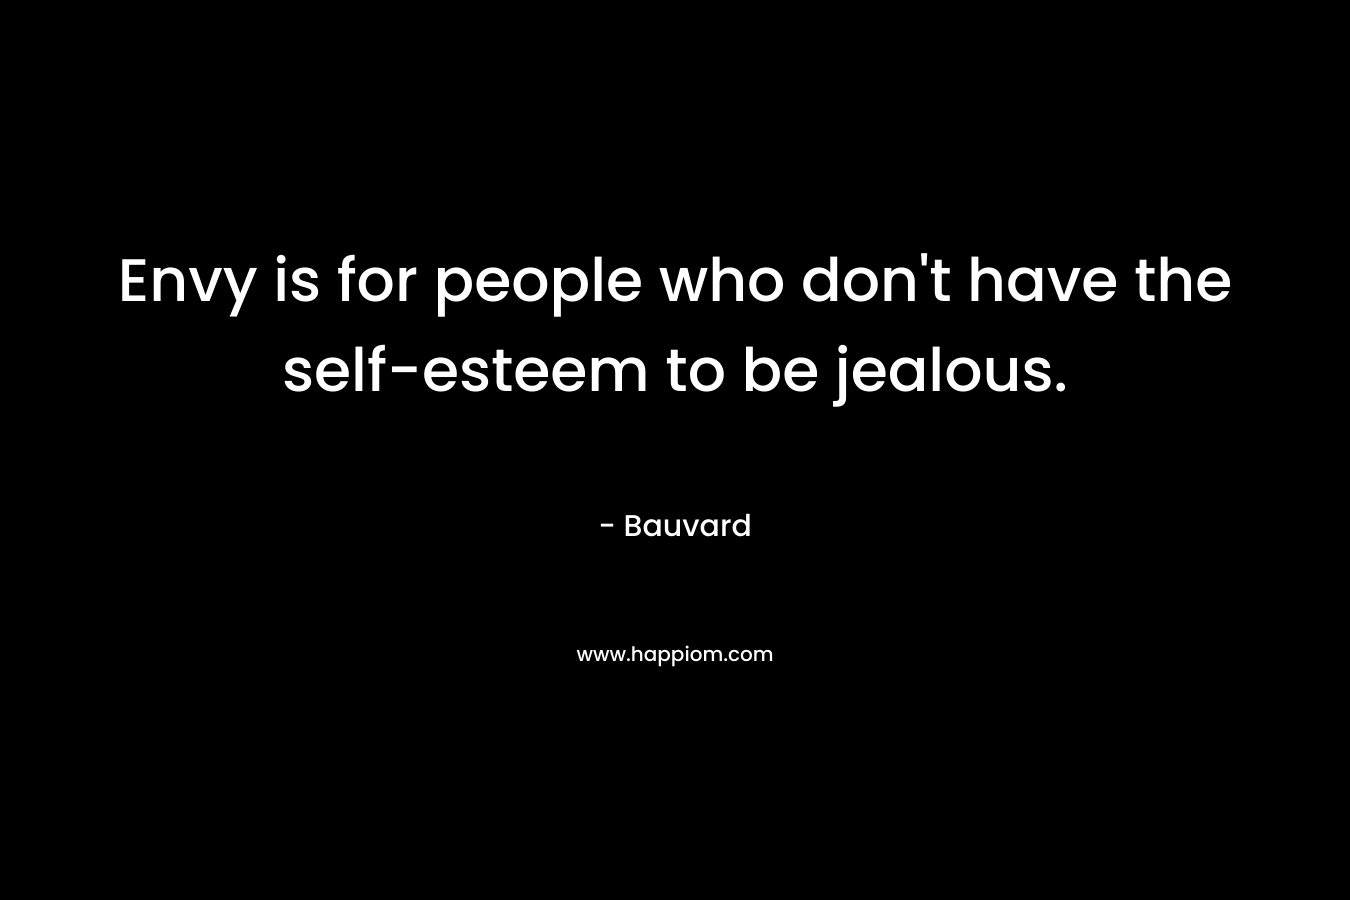 Envy is for people who don't have the self-esteem to be jealous.